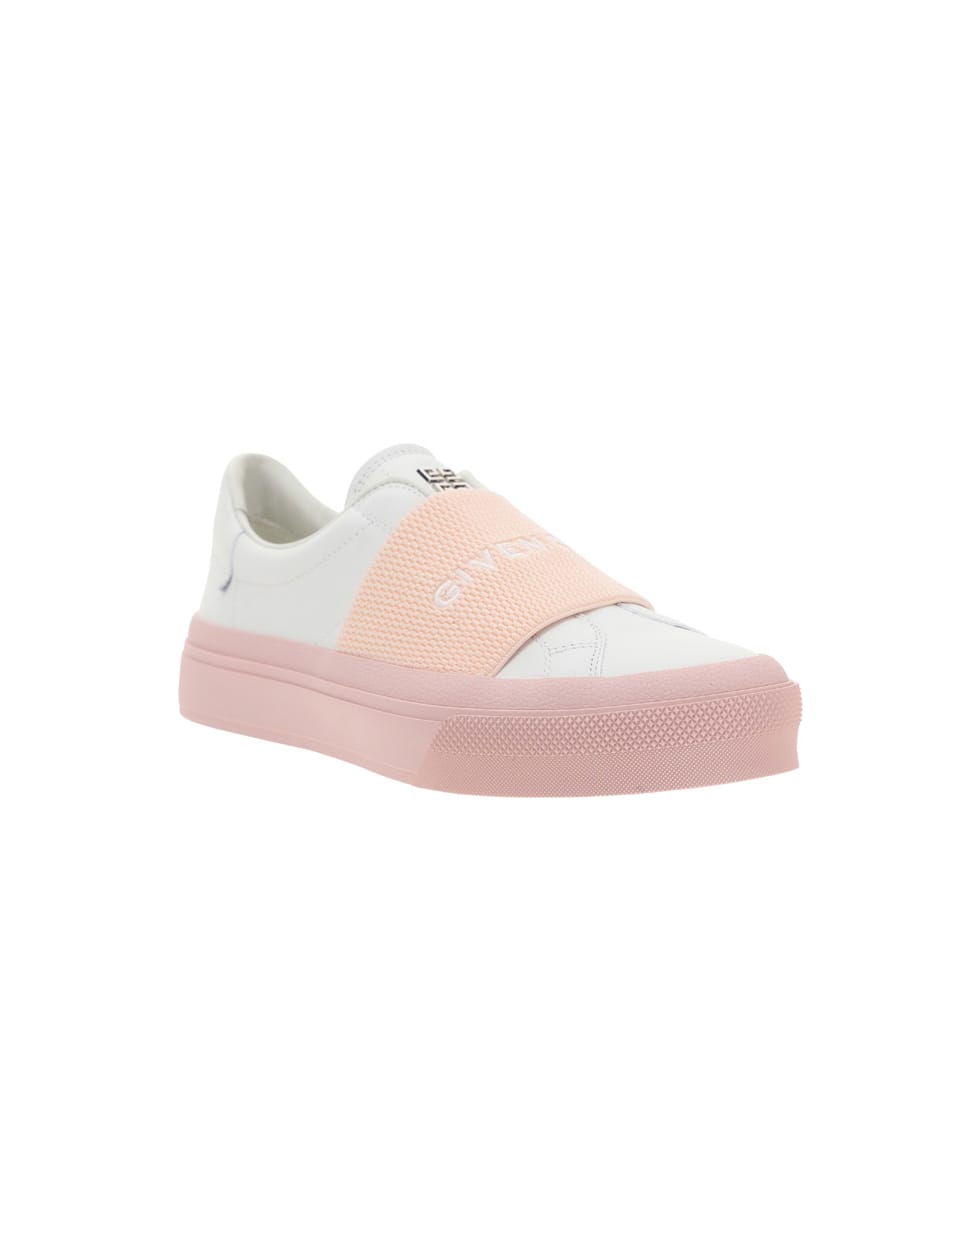 Givenchy City Sneakers | EdifactoryShops, ALWAYS LIKE A SALE